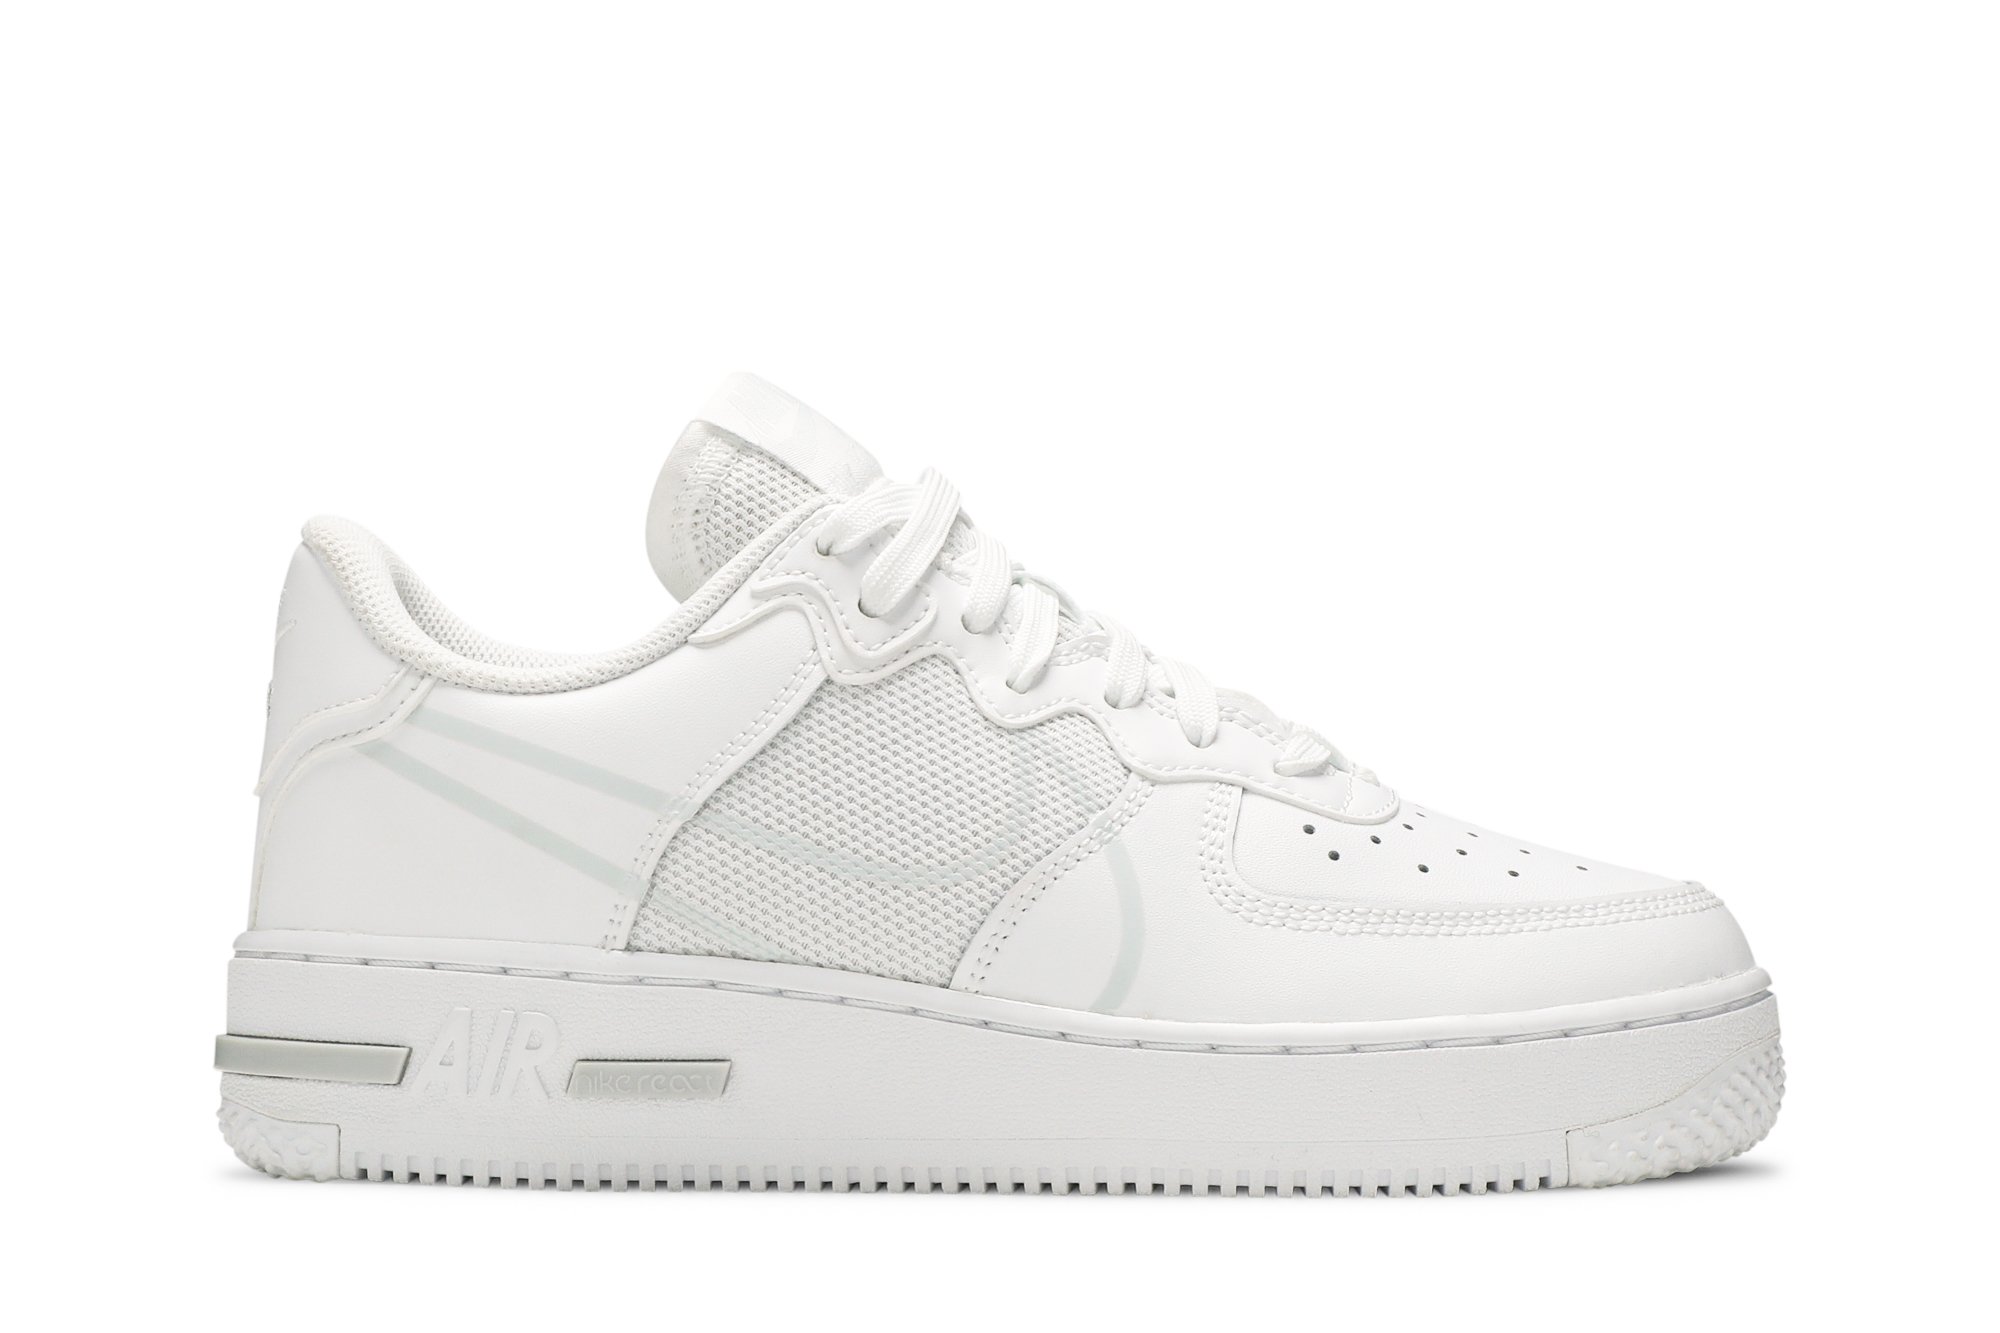 Buy Air Force 1 React SU GS 'White' - CT5117 101 | GOAT